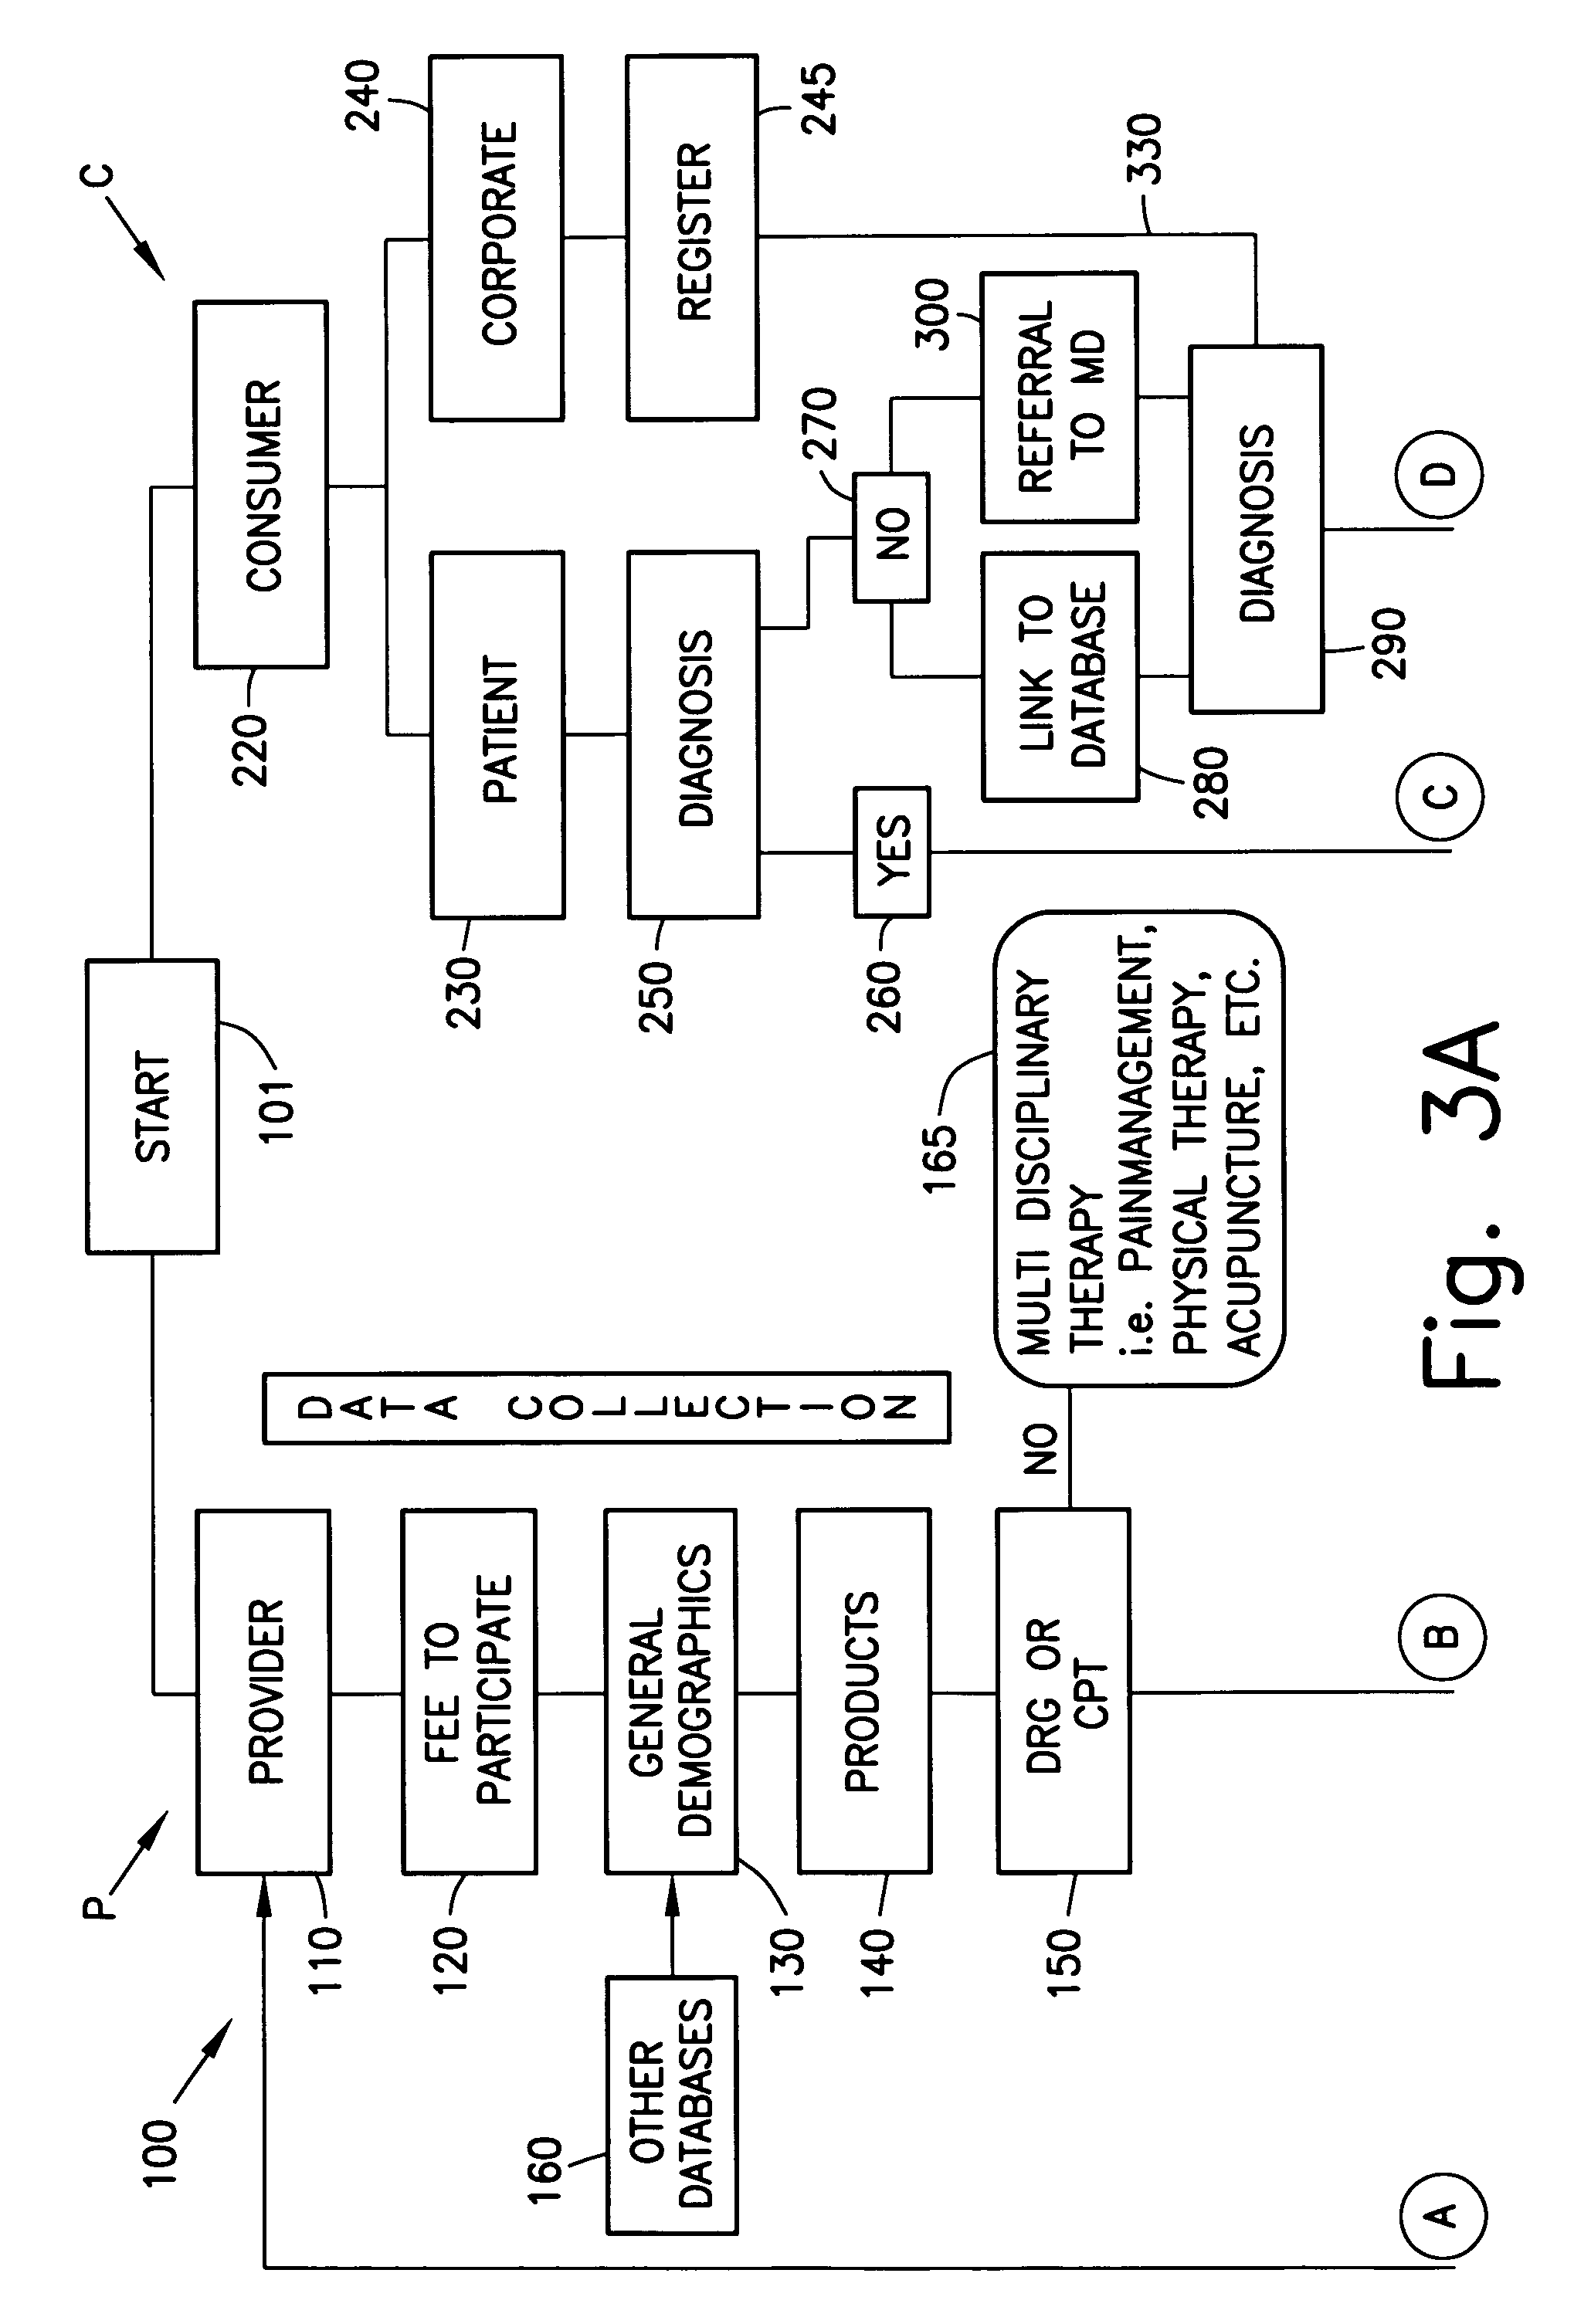 Method and apparatus for matching consumer of health care services to health care service provider